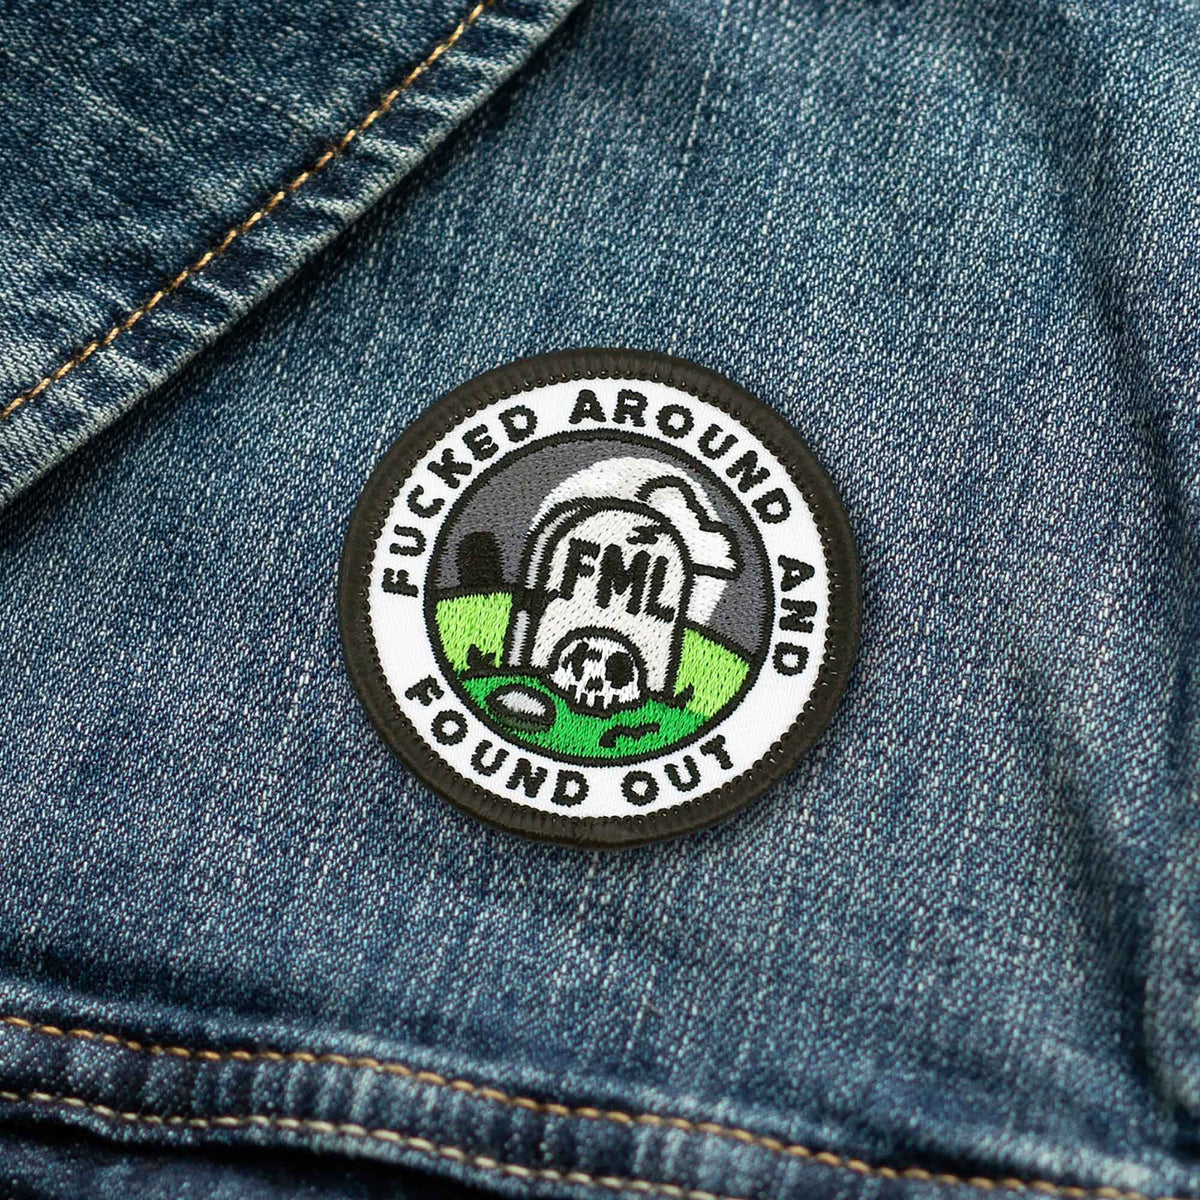 Fucked Around And Found Out individual adulting merit badge patch for adults on denim jacket